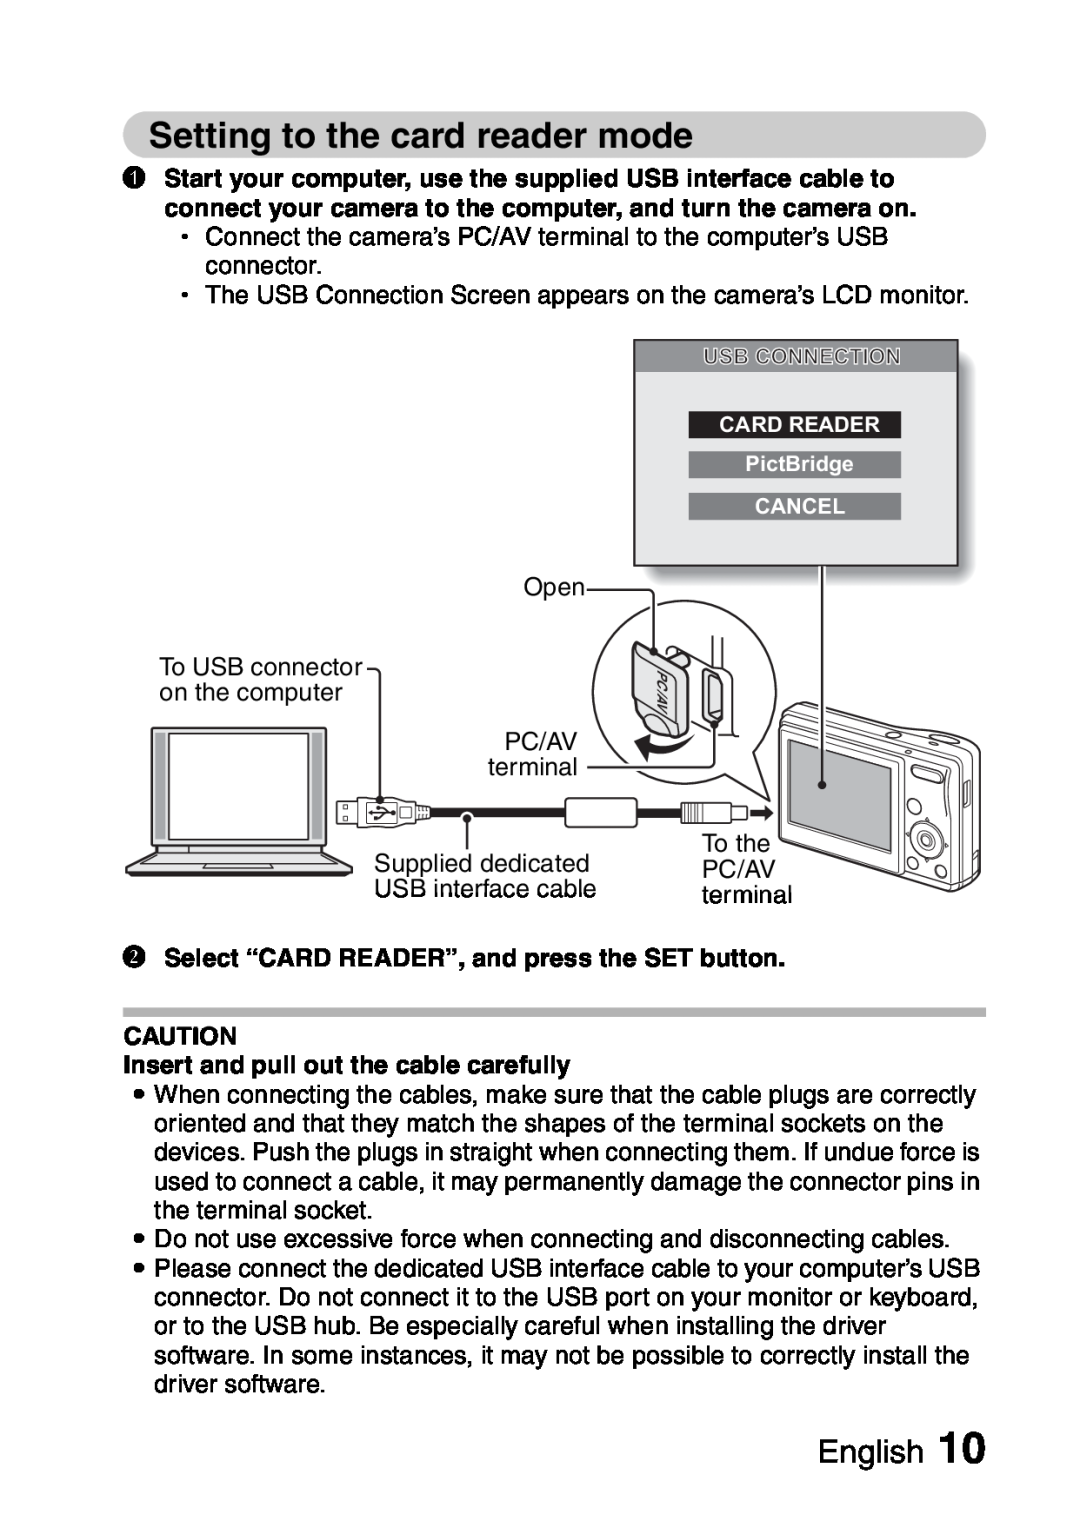 Sanyo VPC-S60 instruction manual Setting to the card reader mode, Select “CARD READER”, and press the SET button, English 